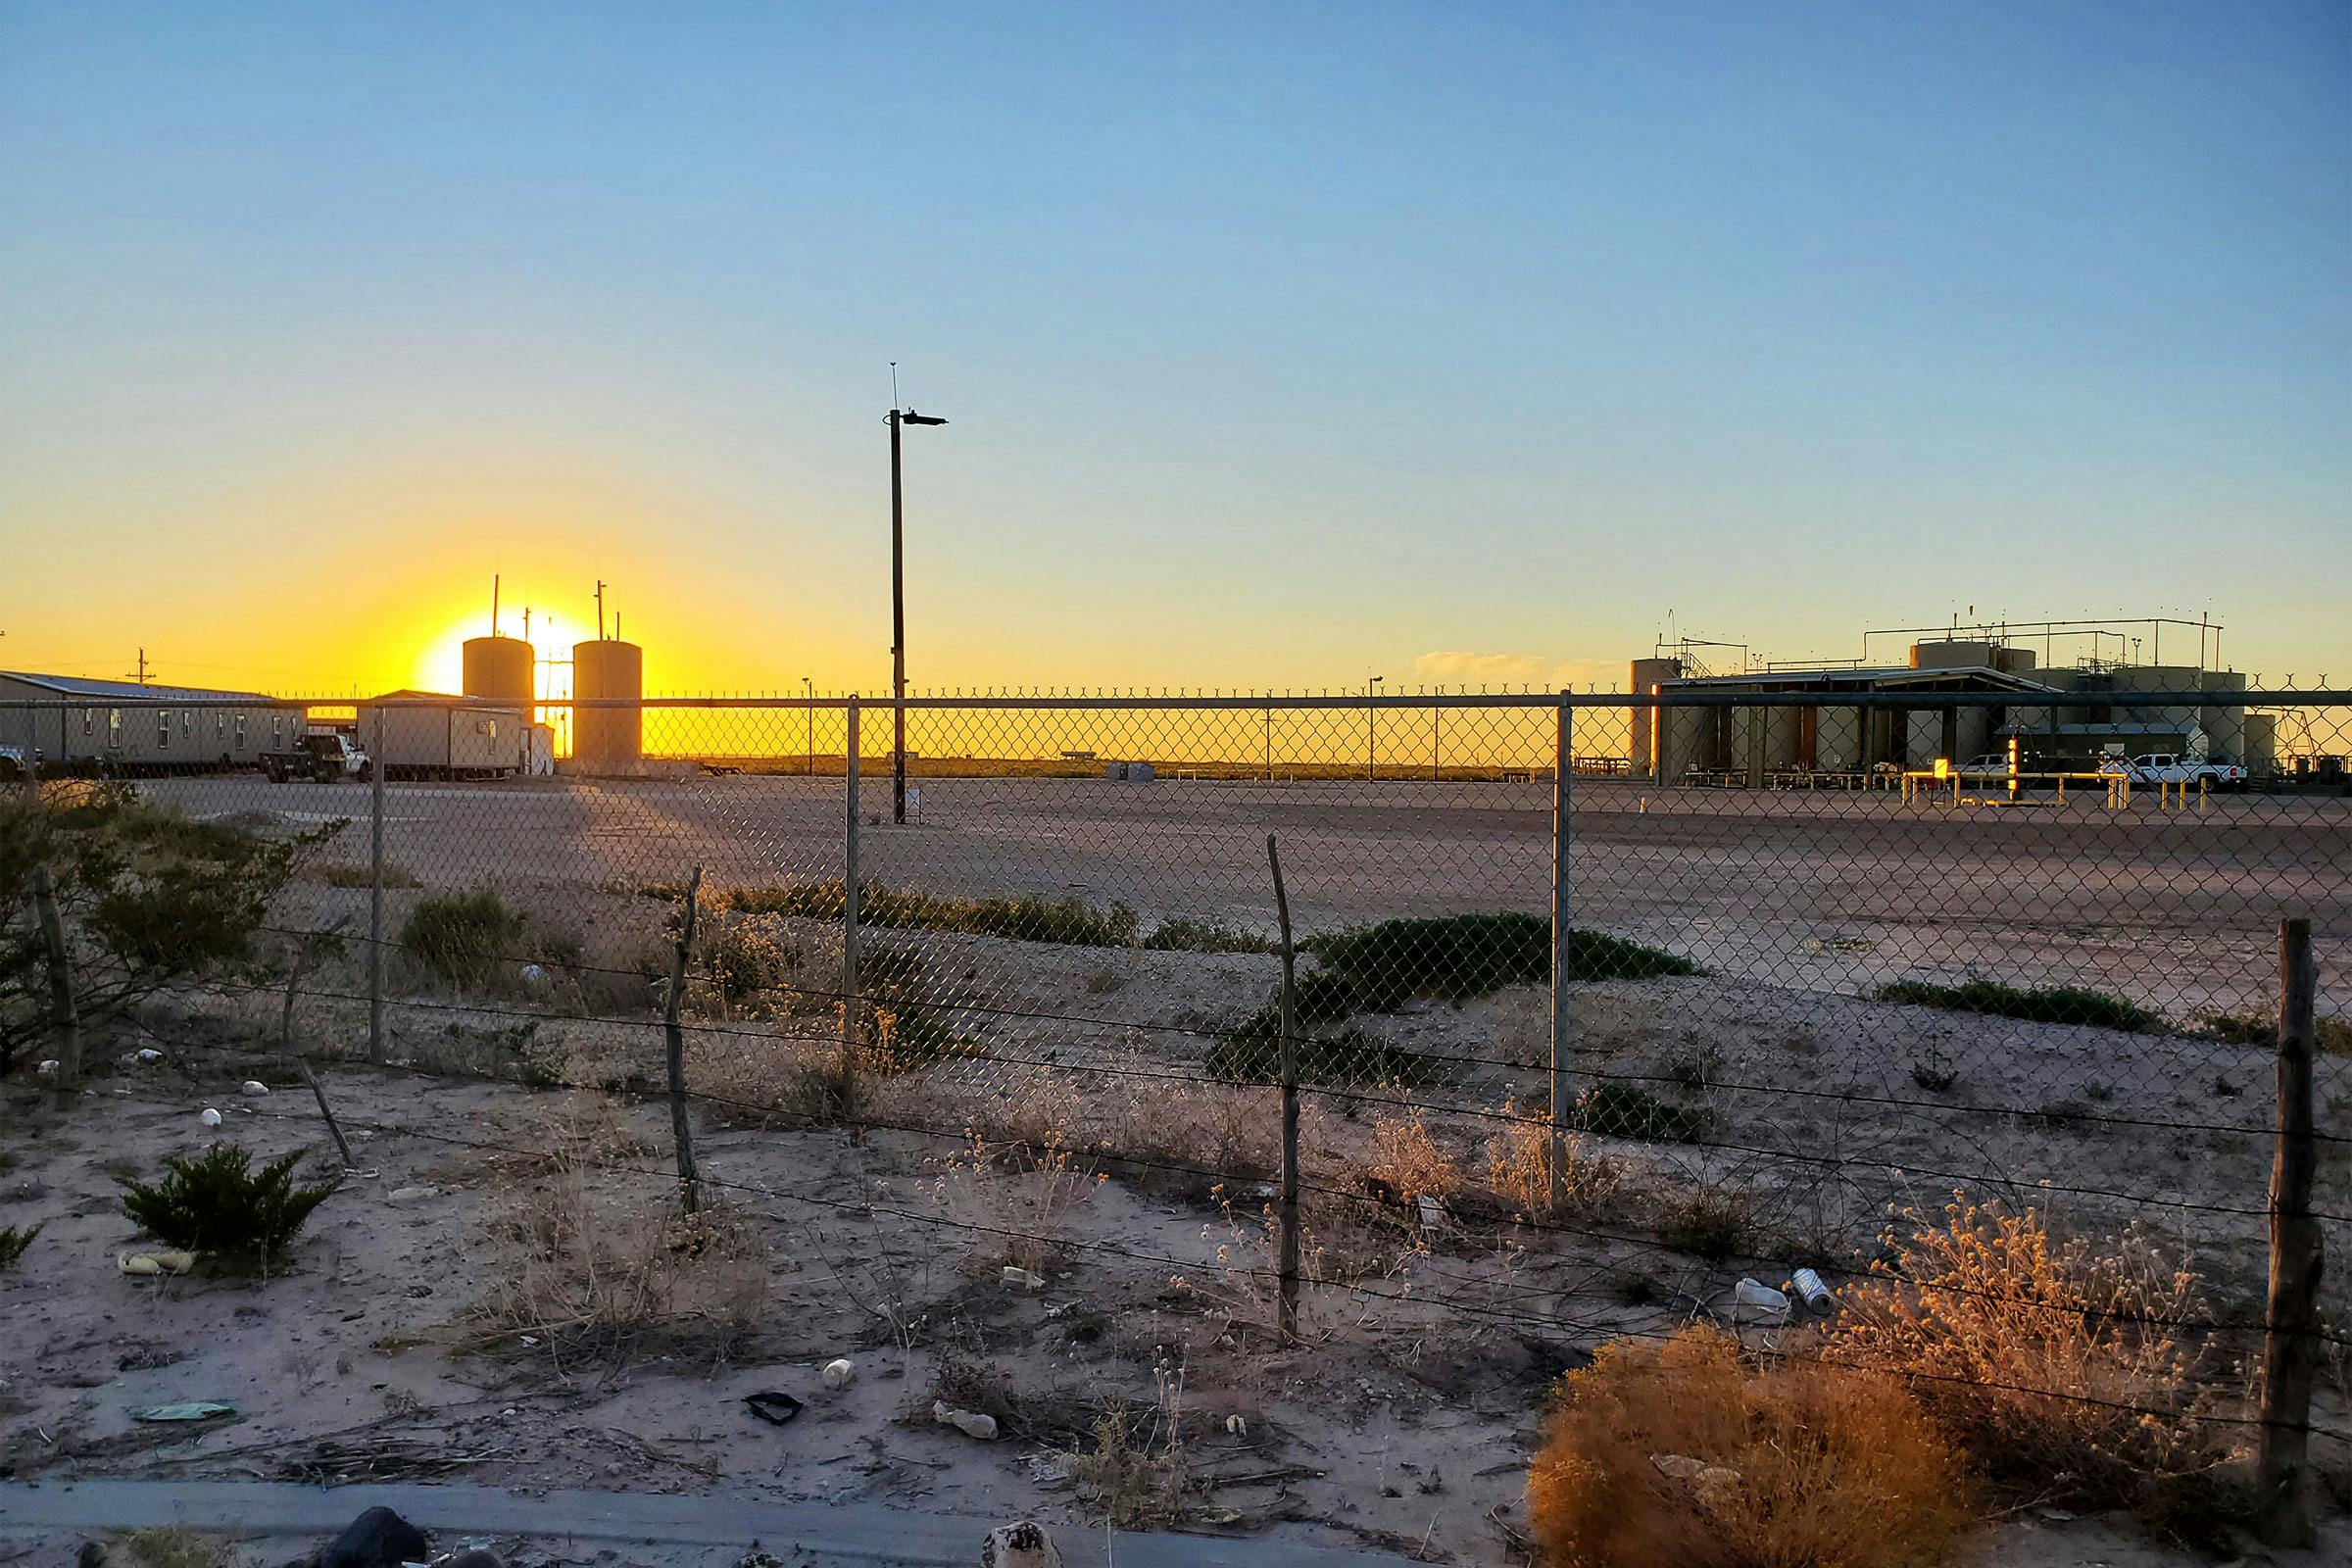 Sunsetting behind tanks and trailers, photographed through a chain link fence. 